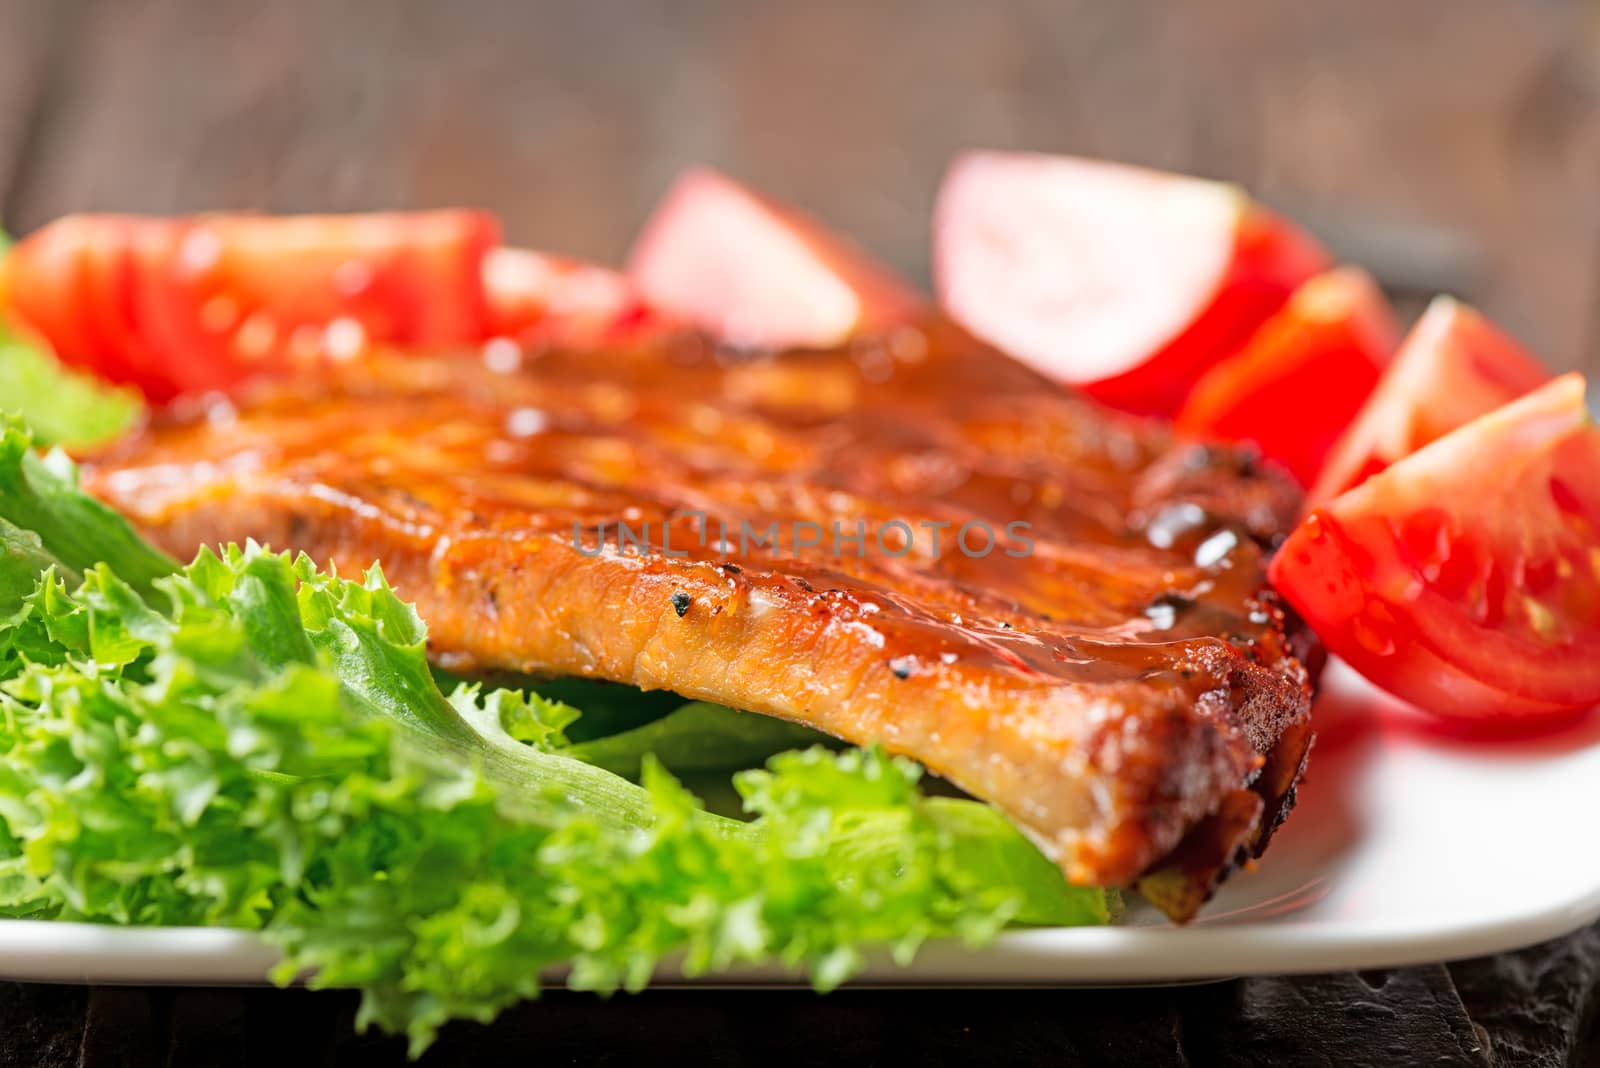 Delicious barbecued ribs seasoned with a spicy basting sauce and served with tomatoes on salad leafs in a country kitchen